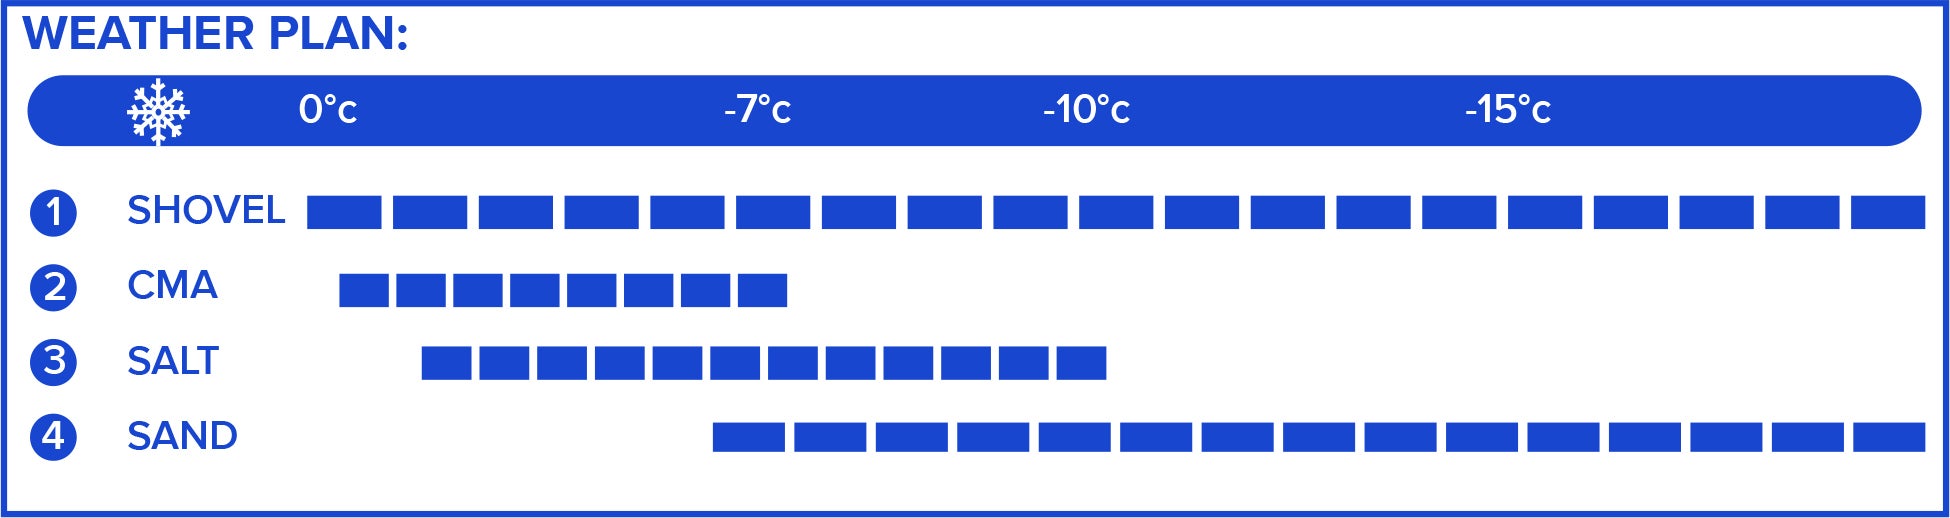 This graphic highlights which de-icing methods are best to use at different temperature increments.